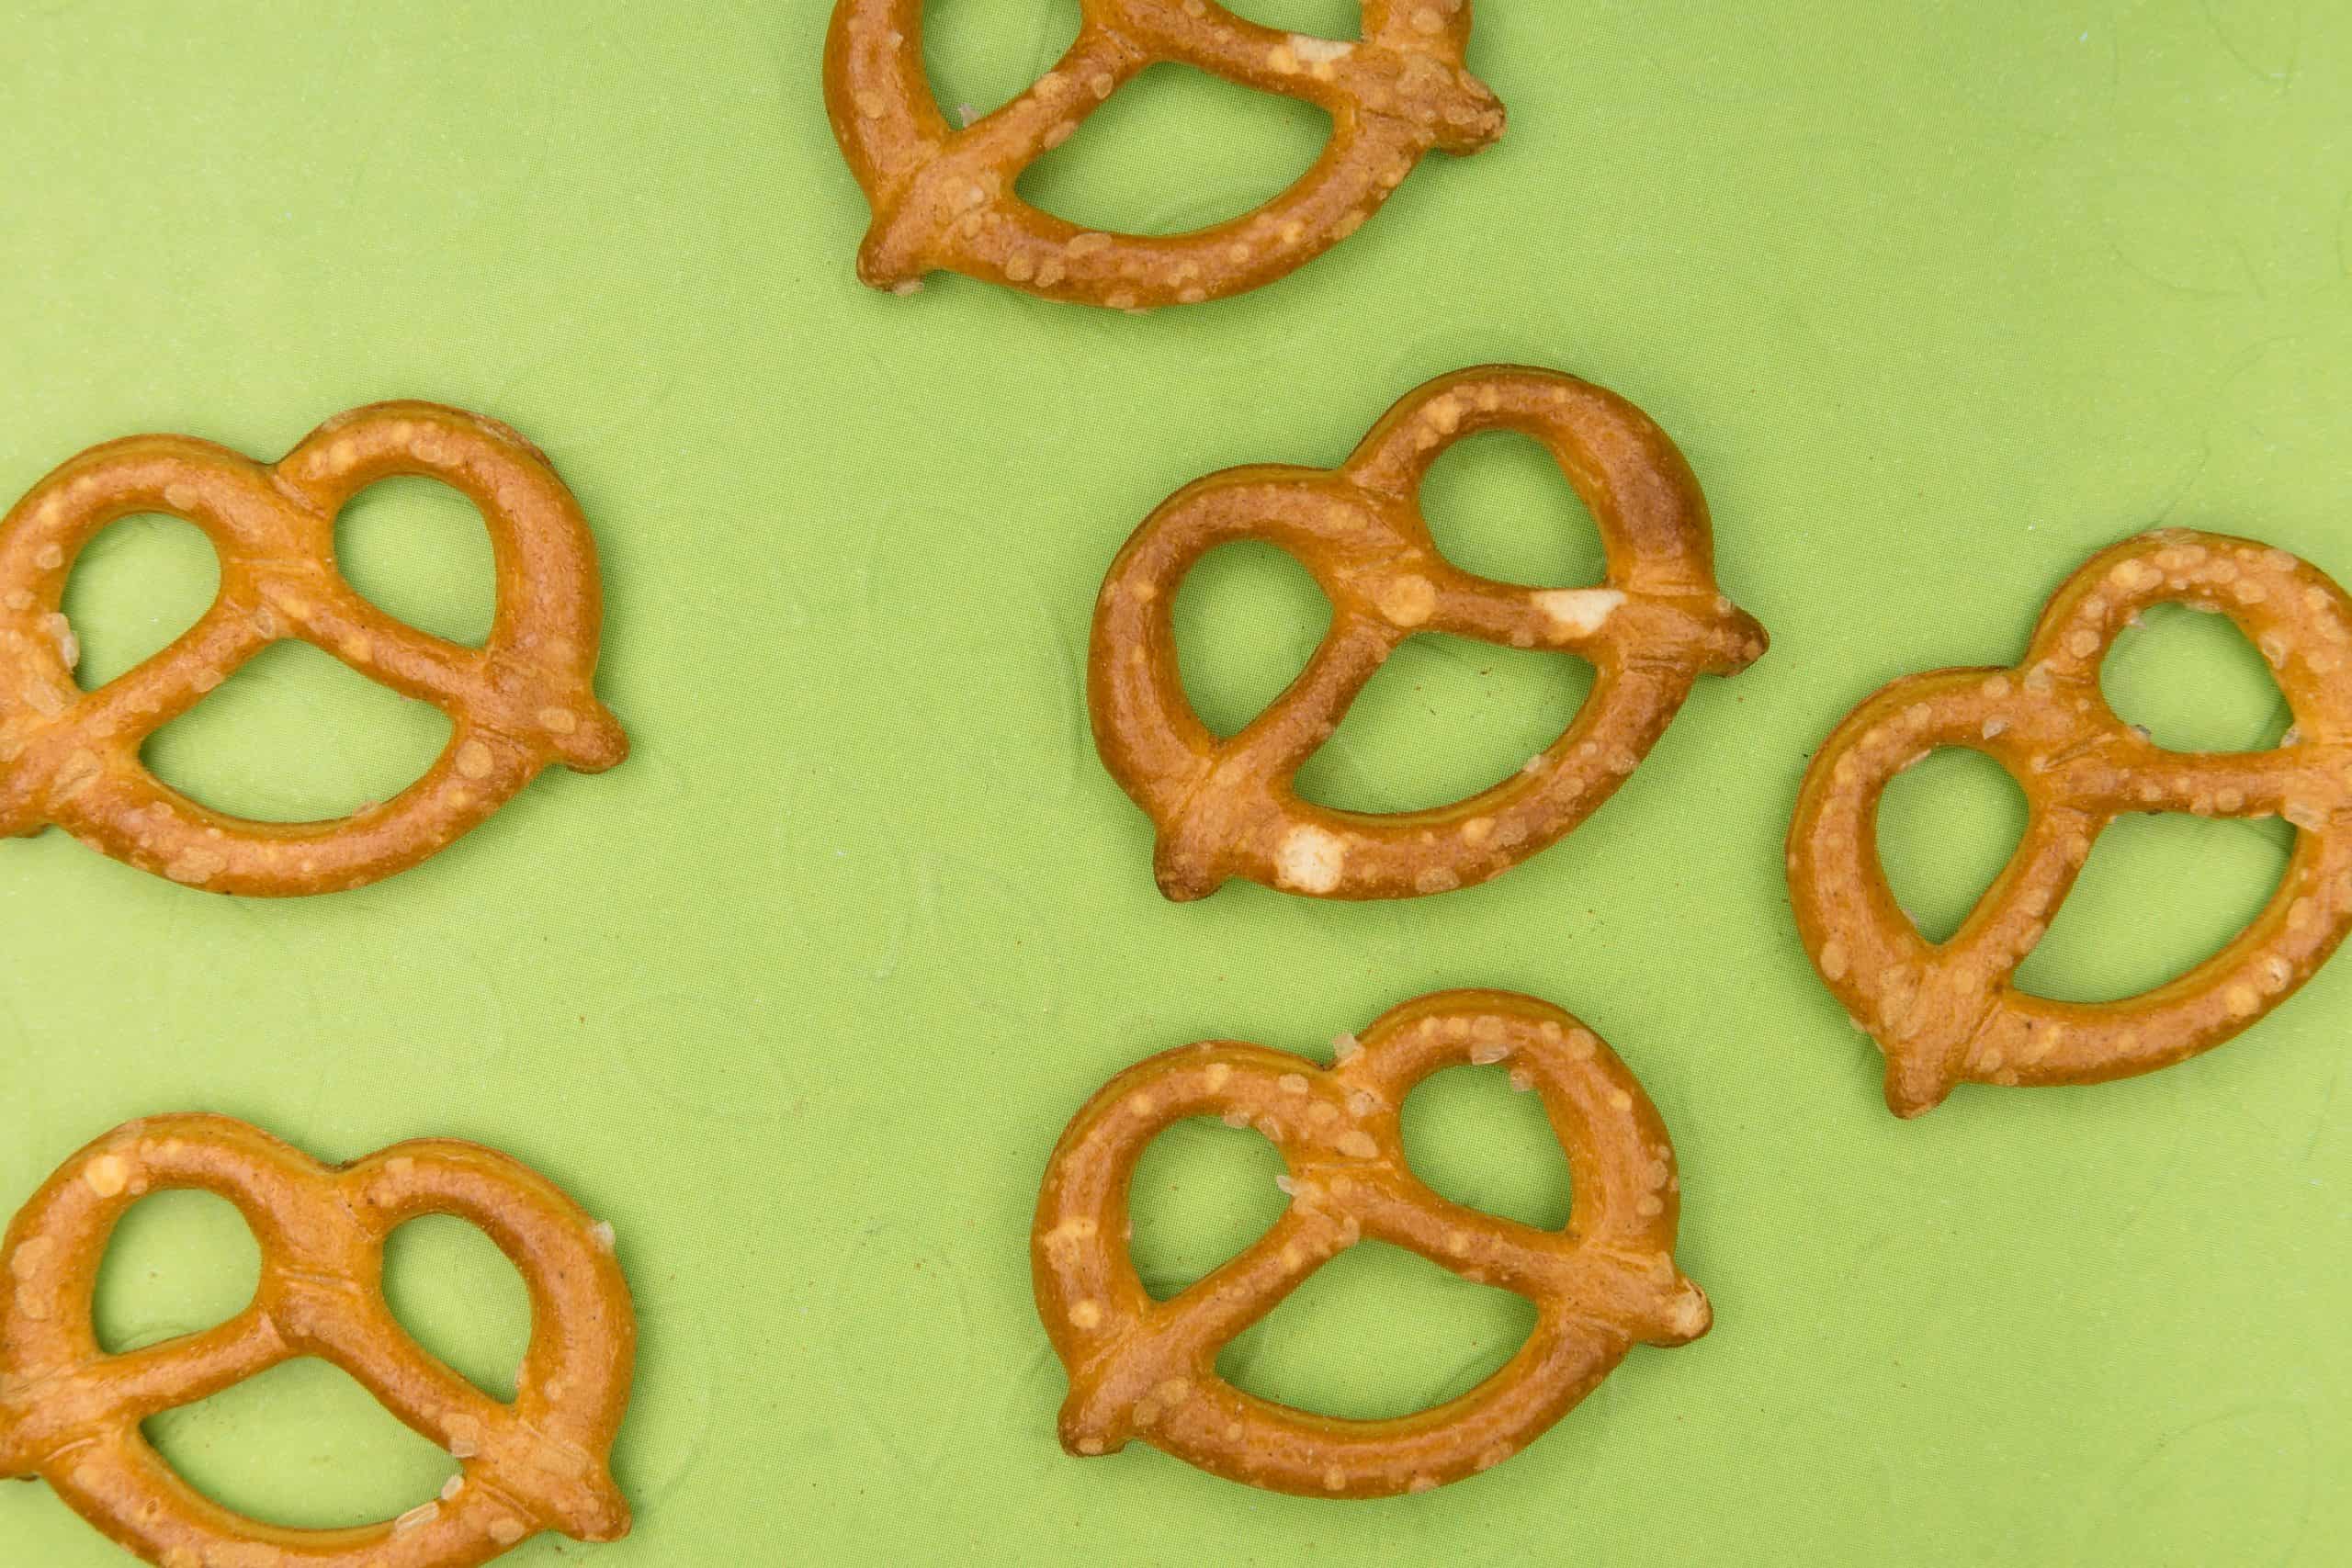 Finding pretzels without palm oil